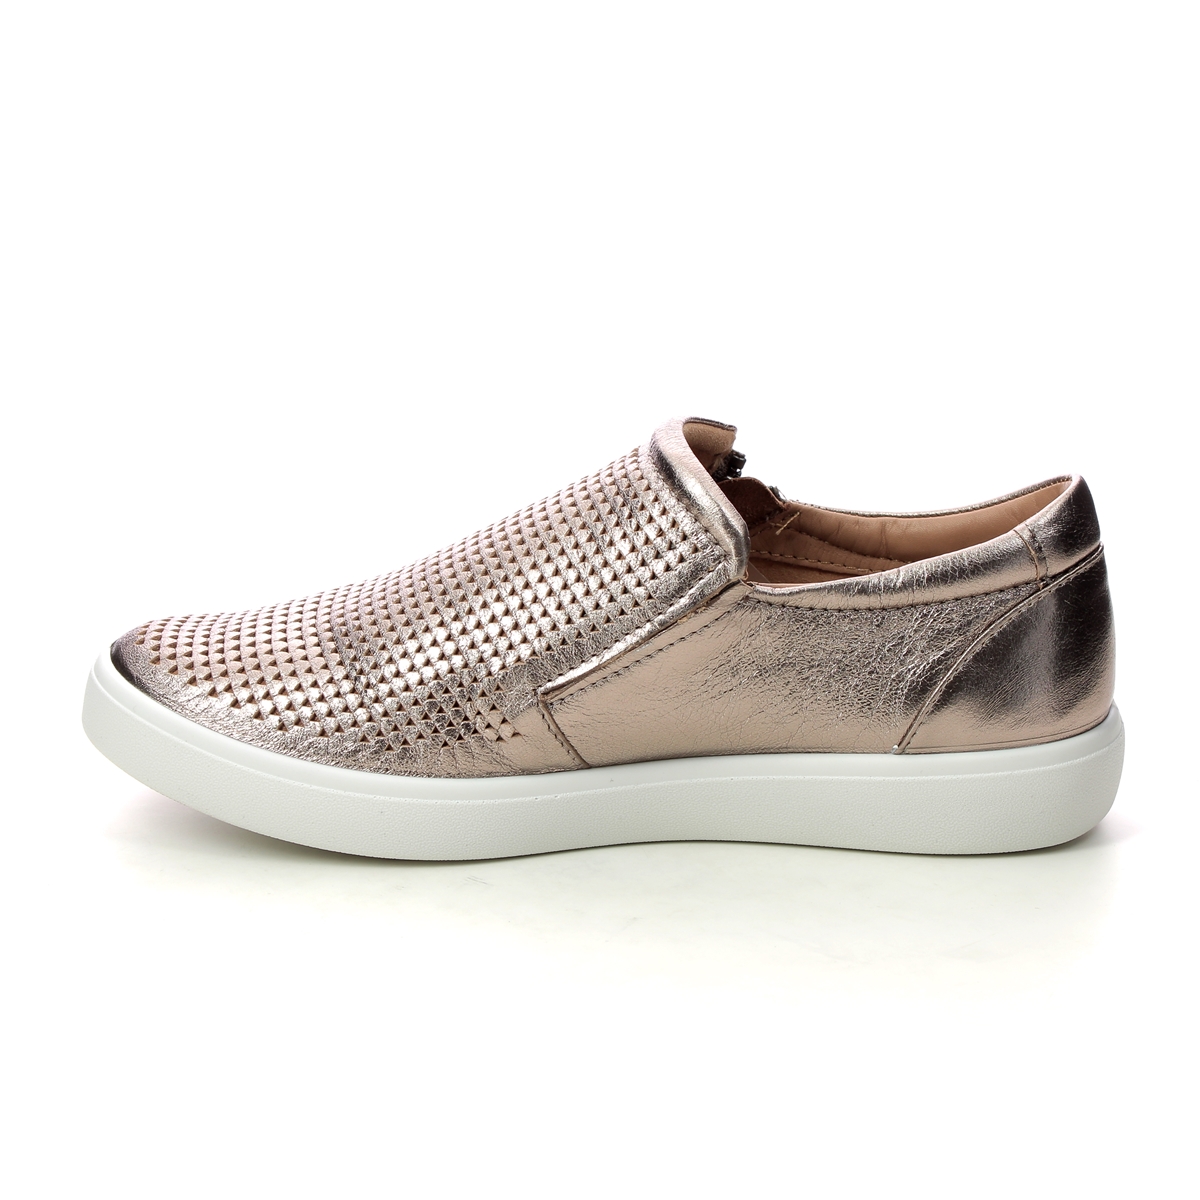 Hotter Daisy Wide 16213-60 Rose Gold Comfort Slip On Shoes